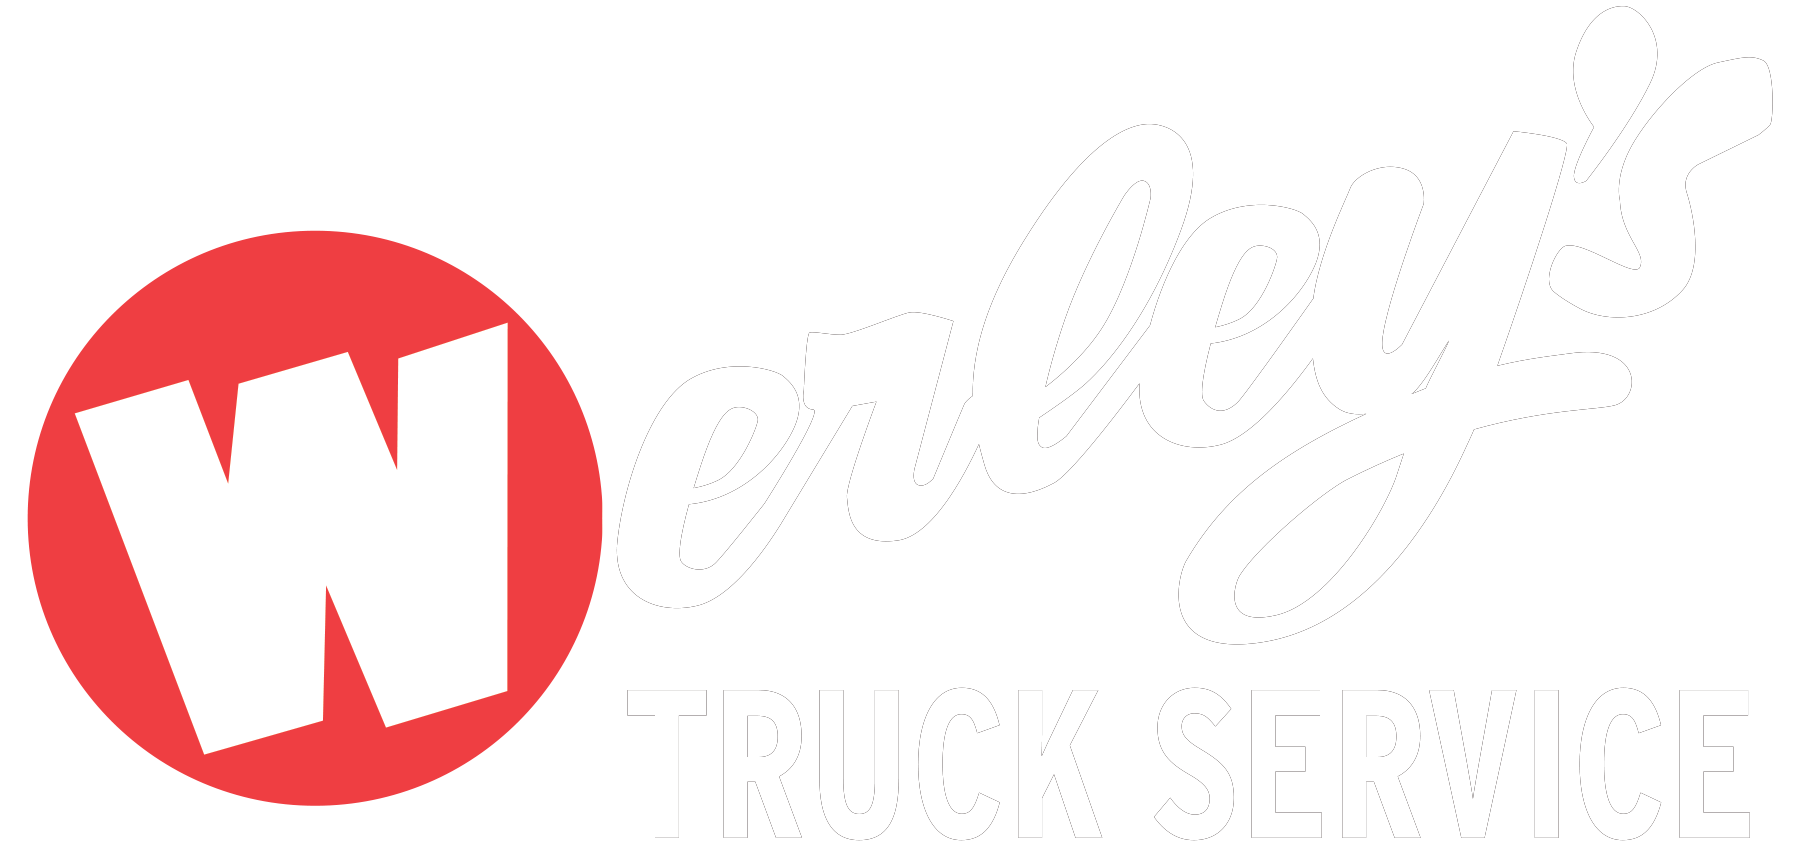 Werley's Truck Service and Sales, Inc